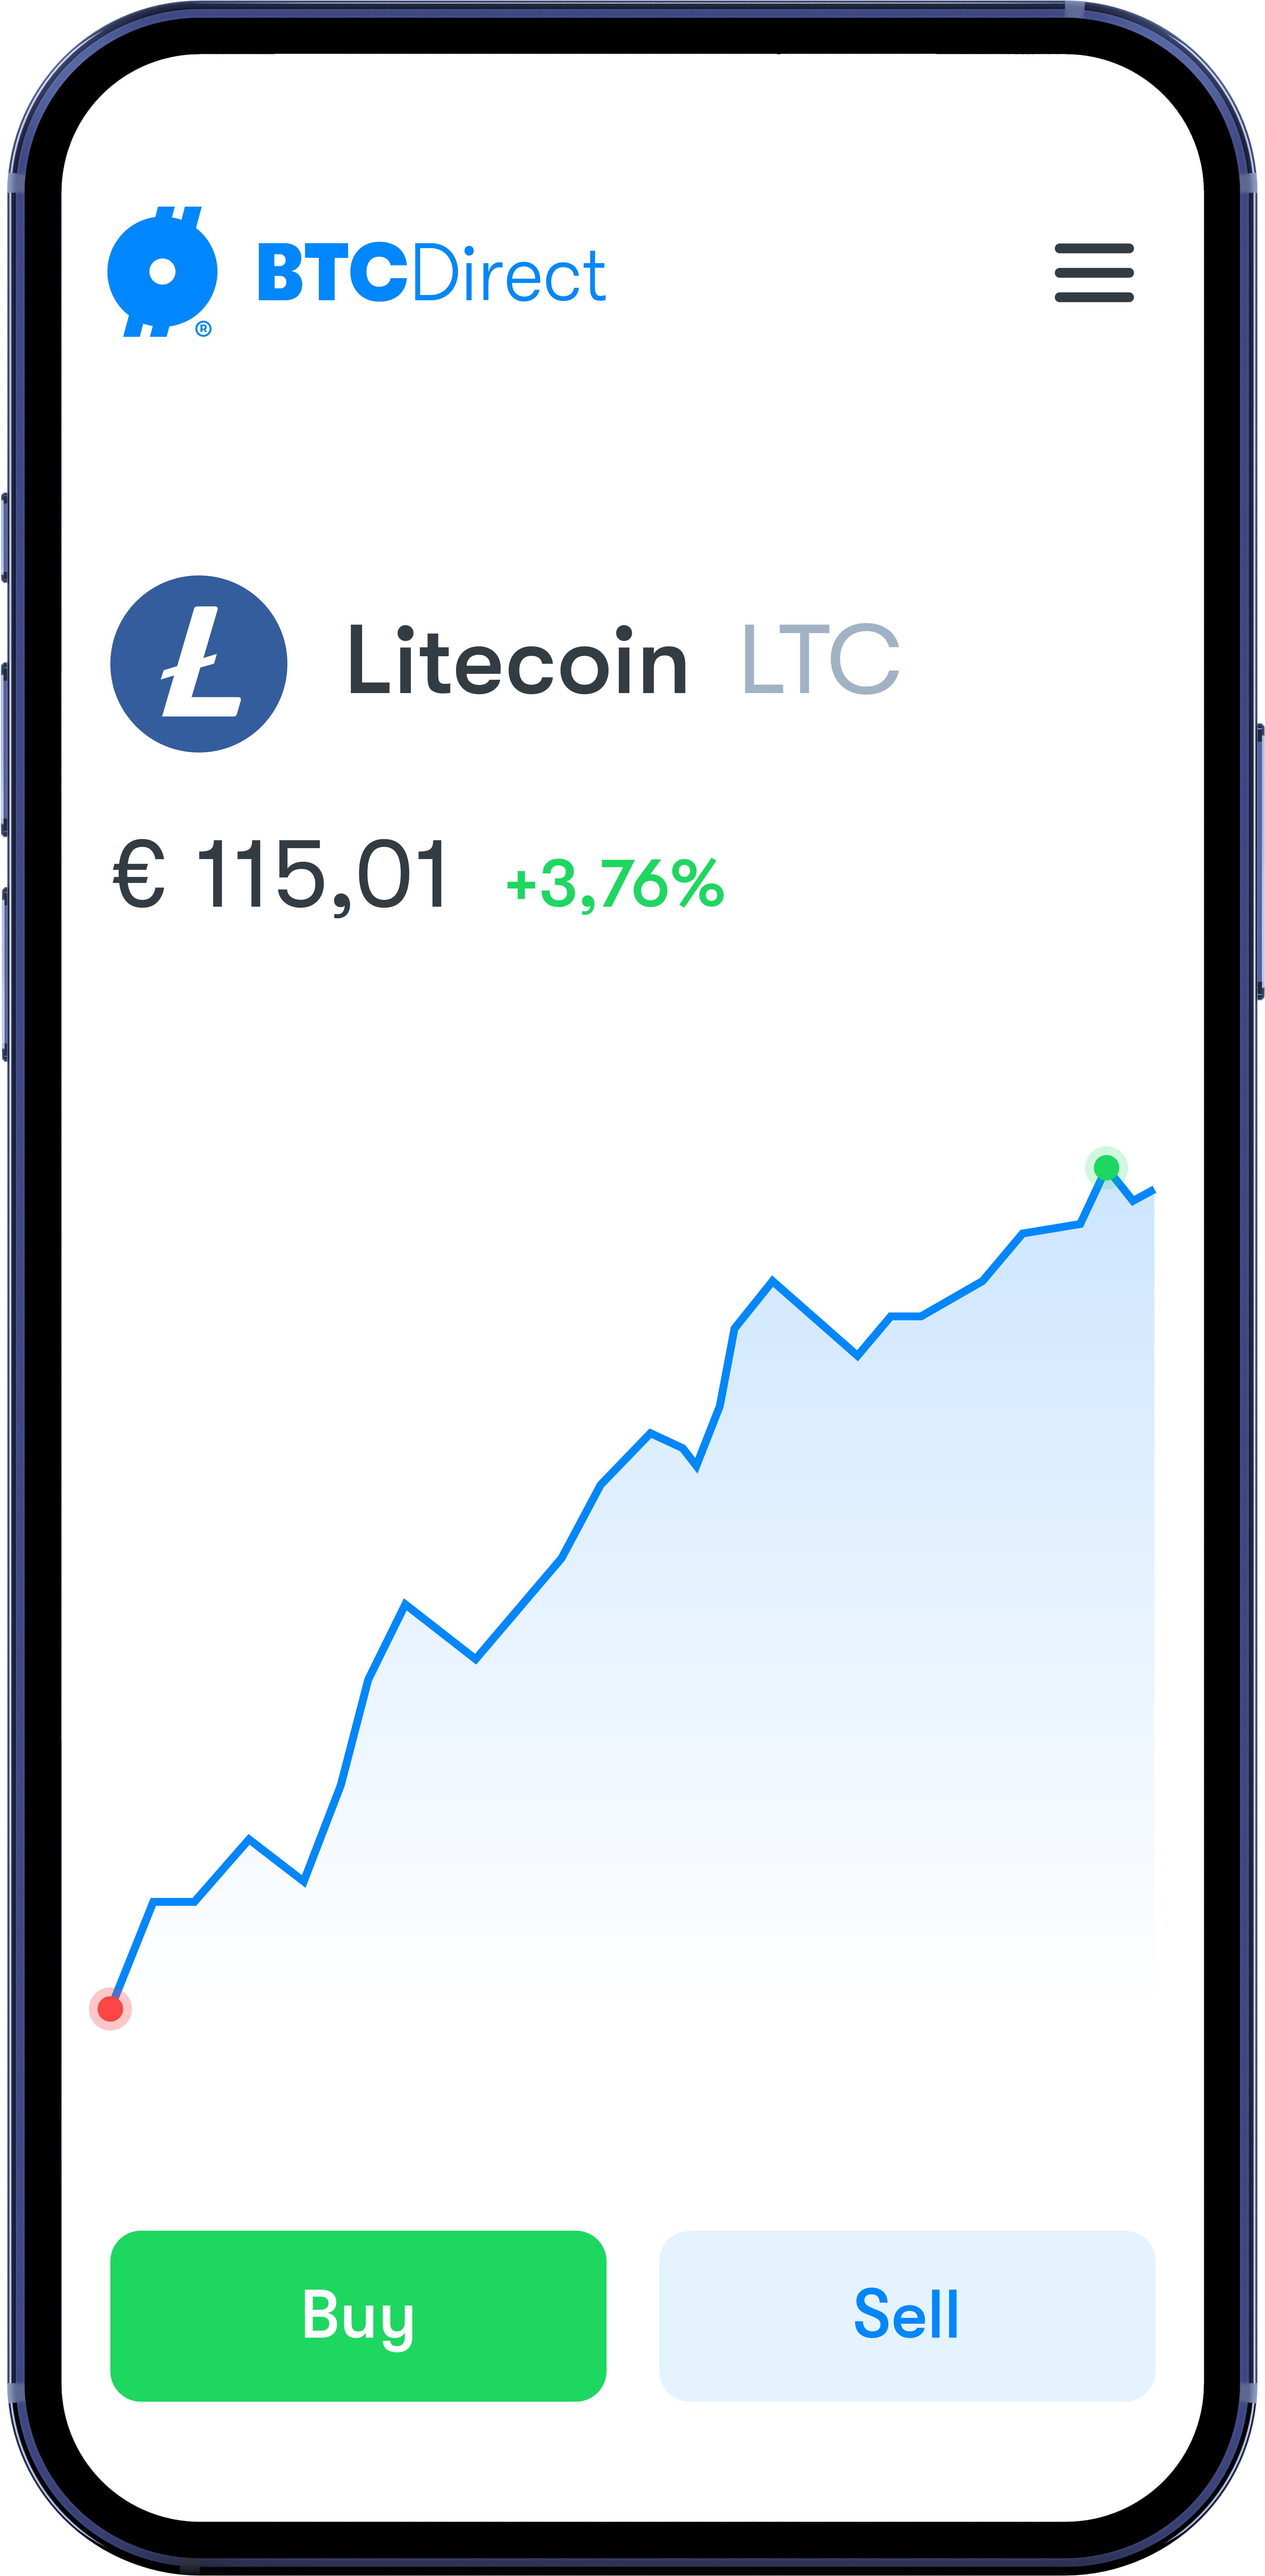 Buying Litecoin is easy